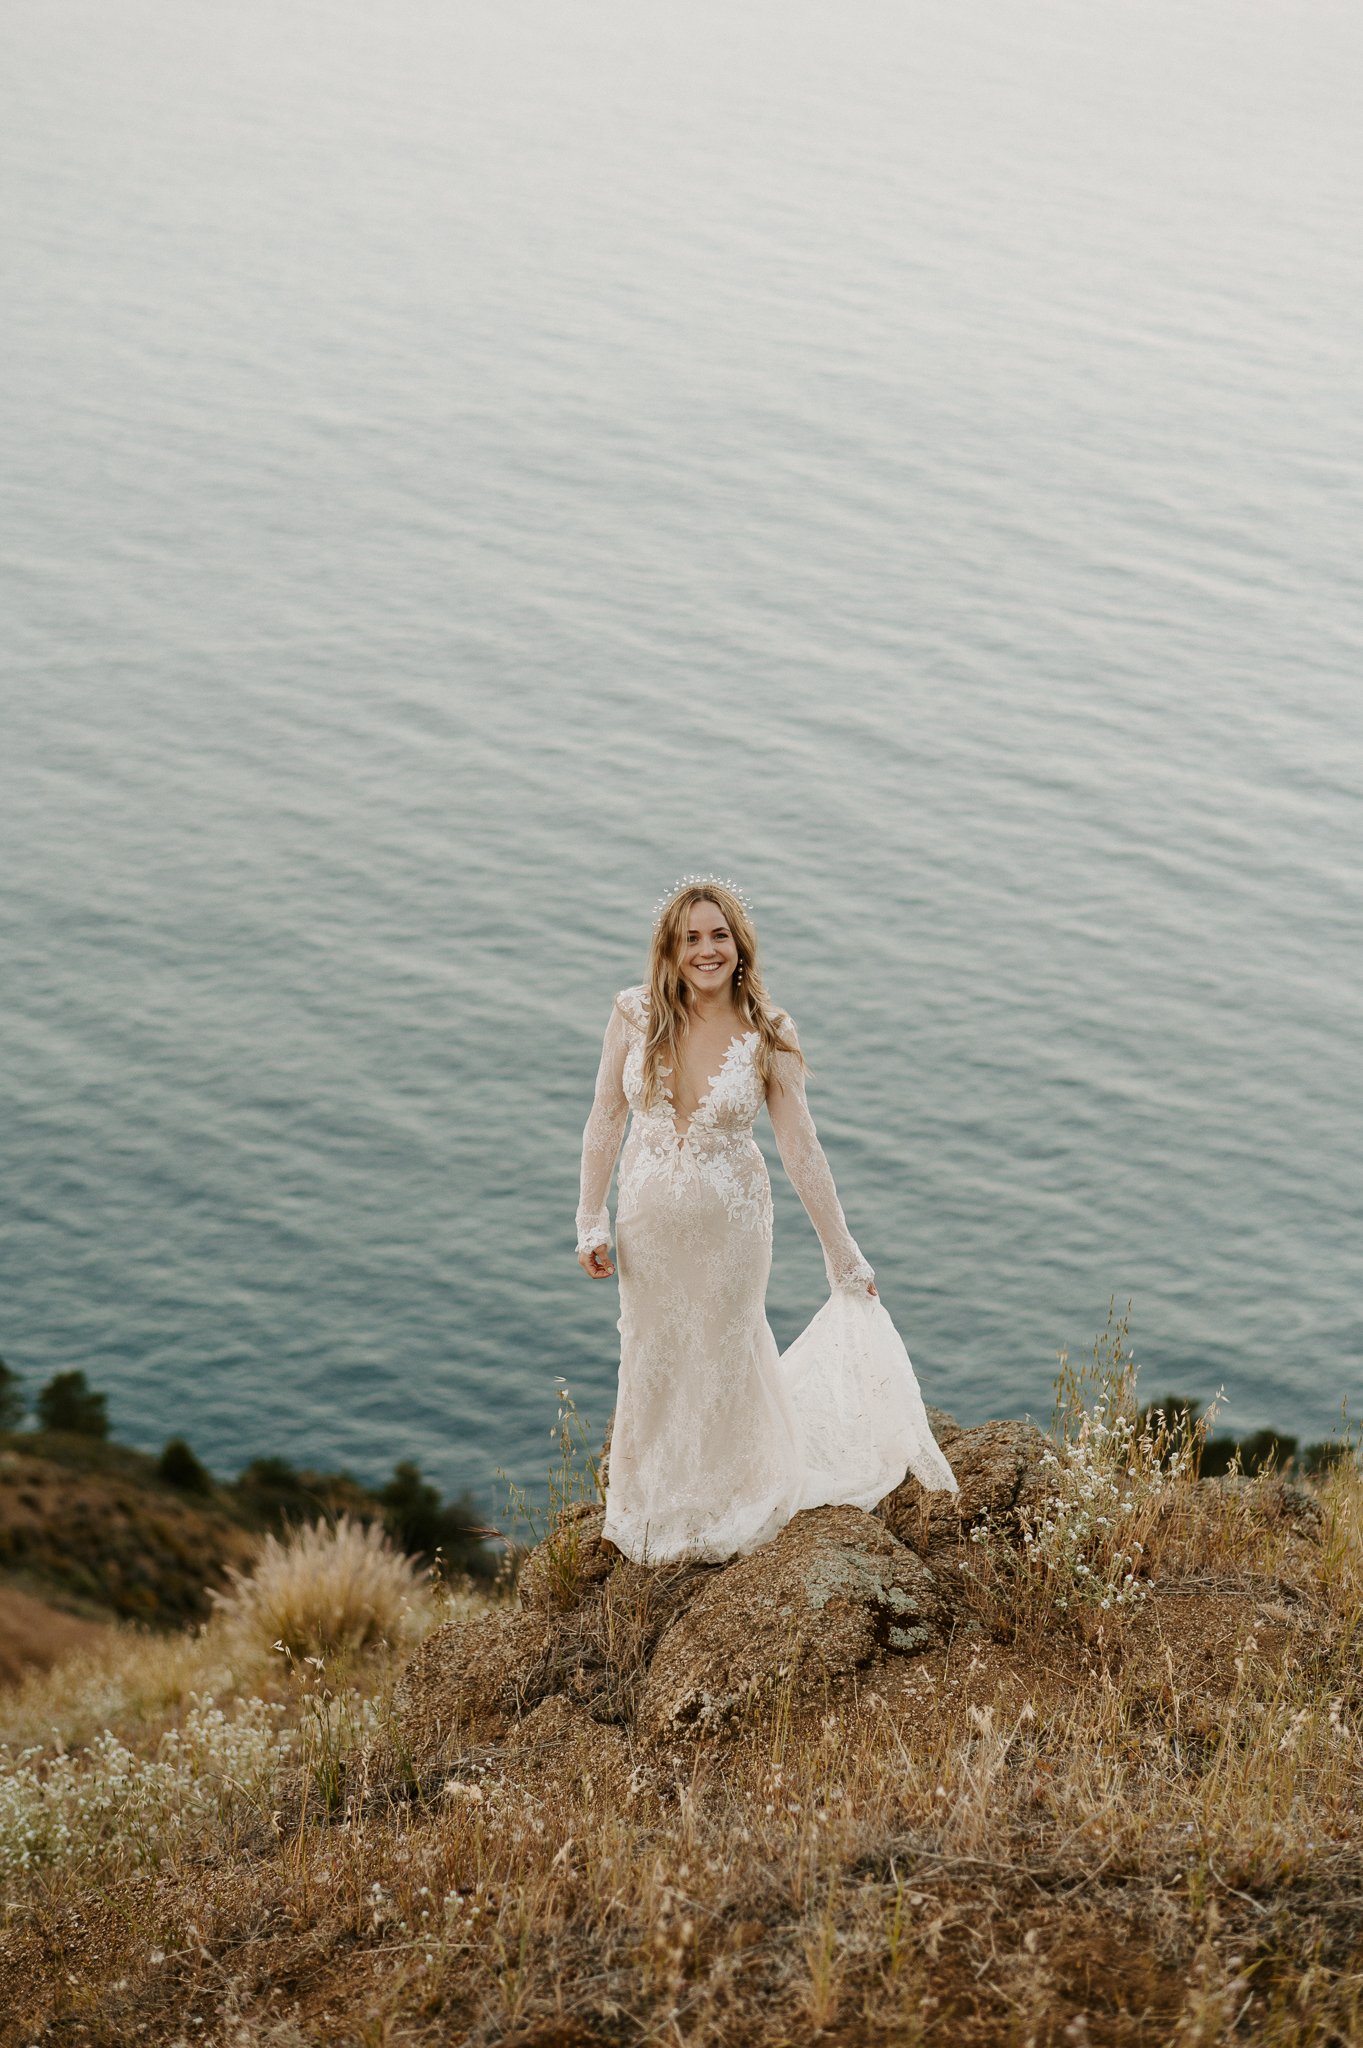 Bride in wedding dress standing on edge cliff with Pacific Ocean behind her